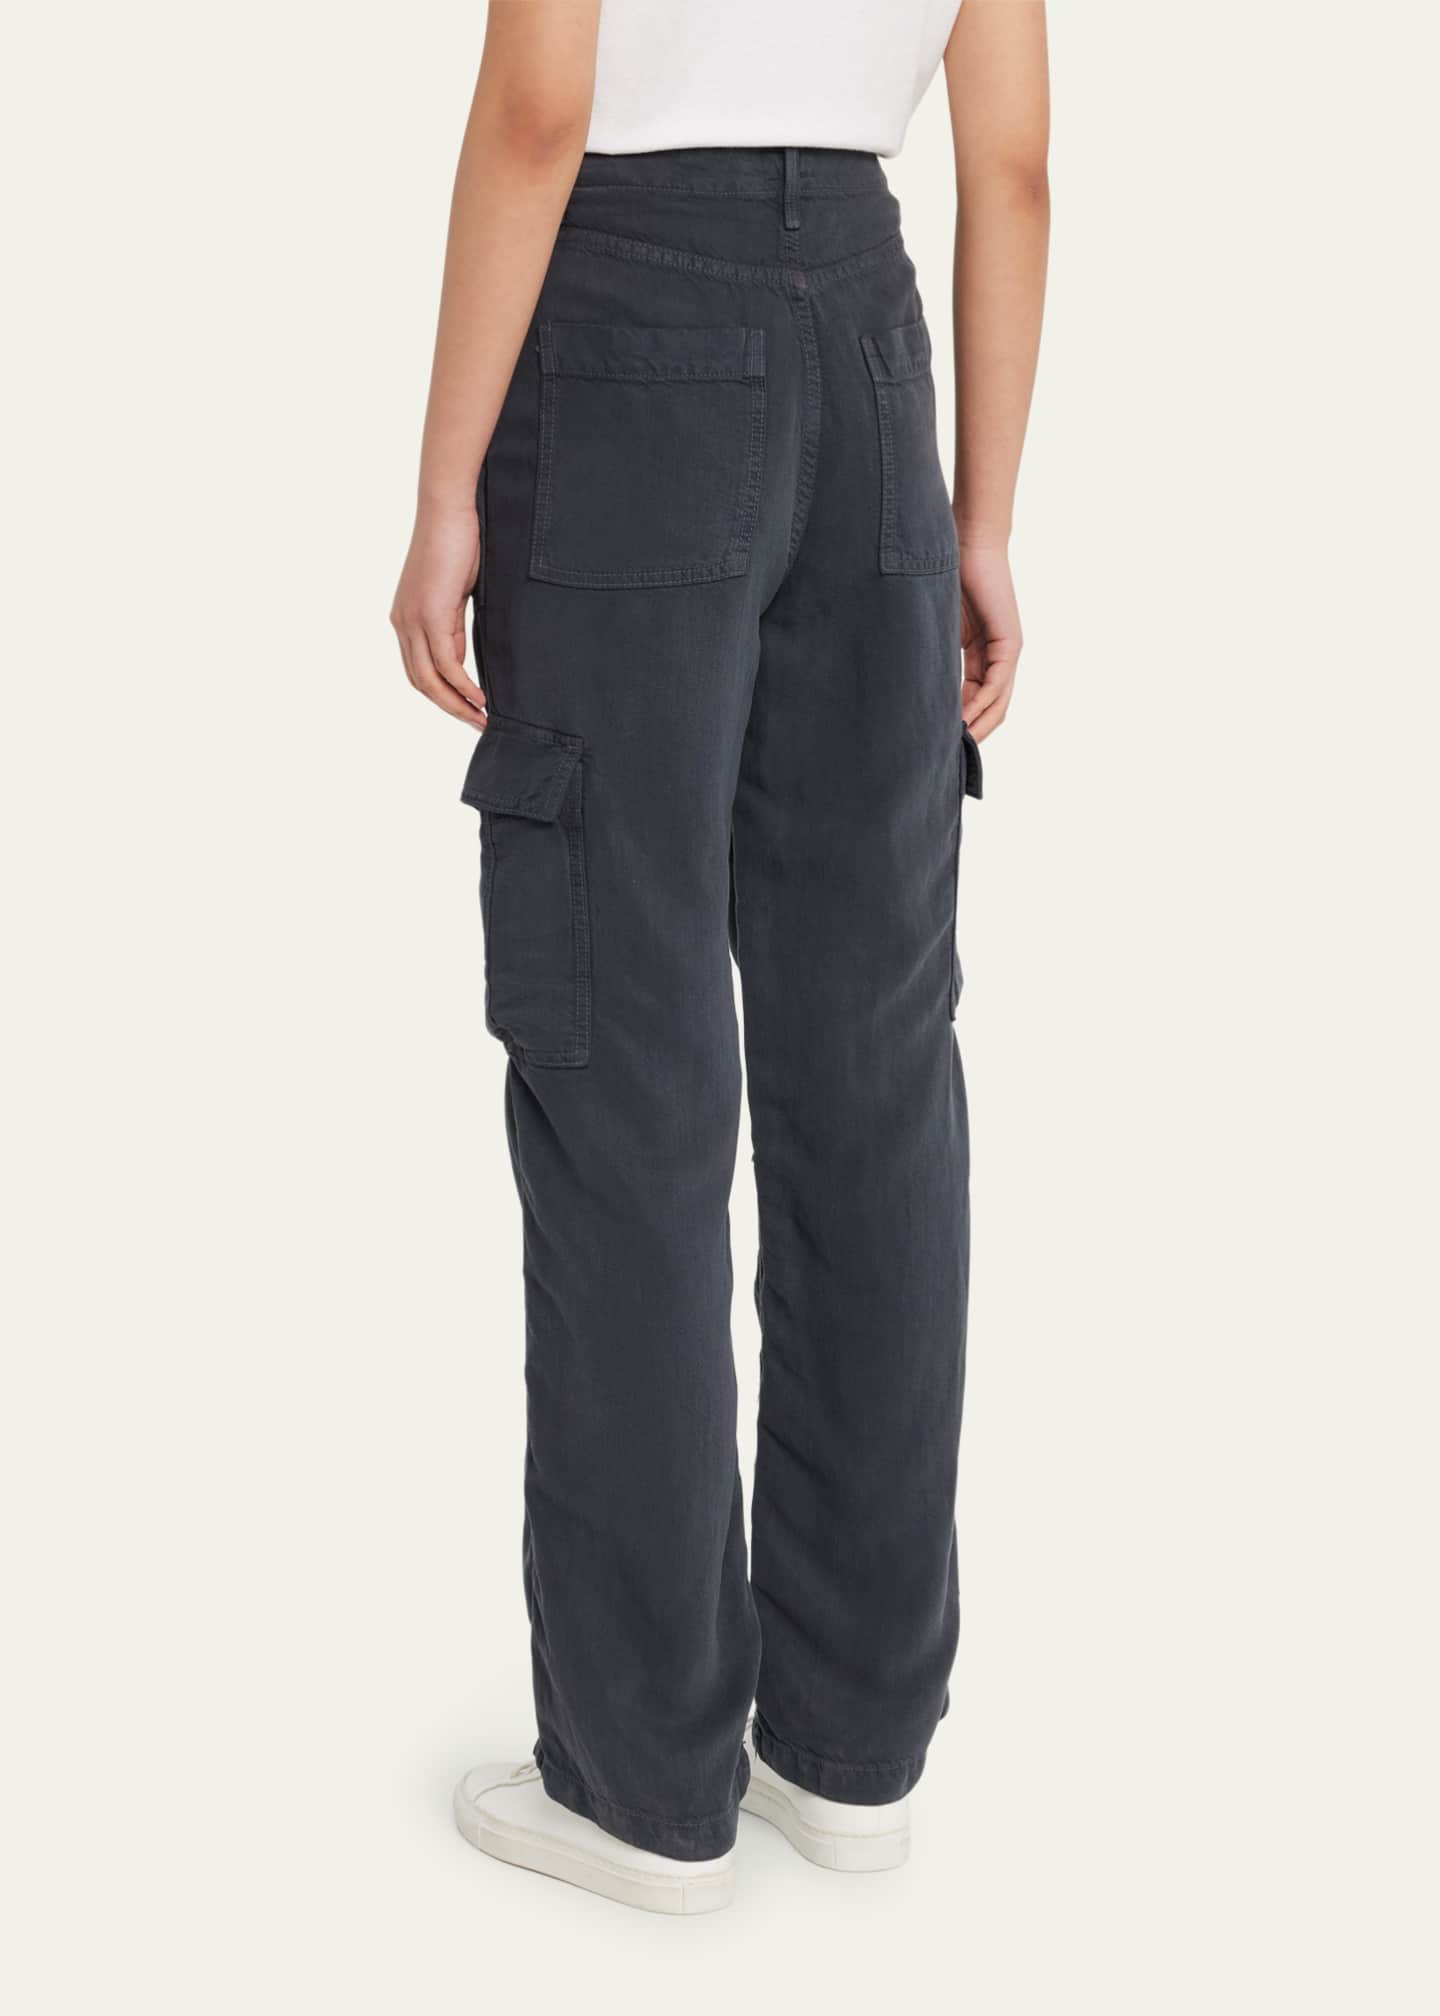 MOTHER The Private Cargo Sneak Pants - Bergdorf Goodman